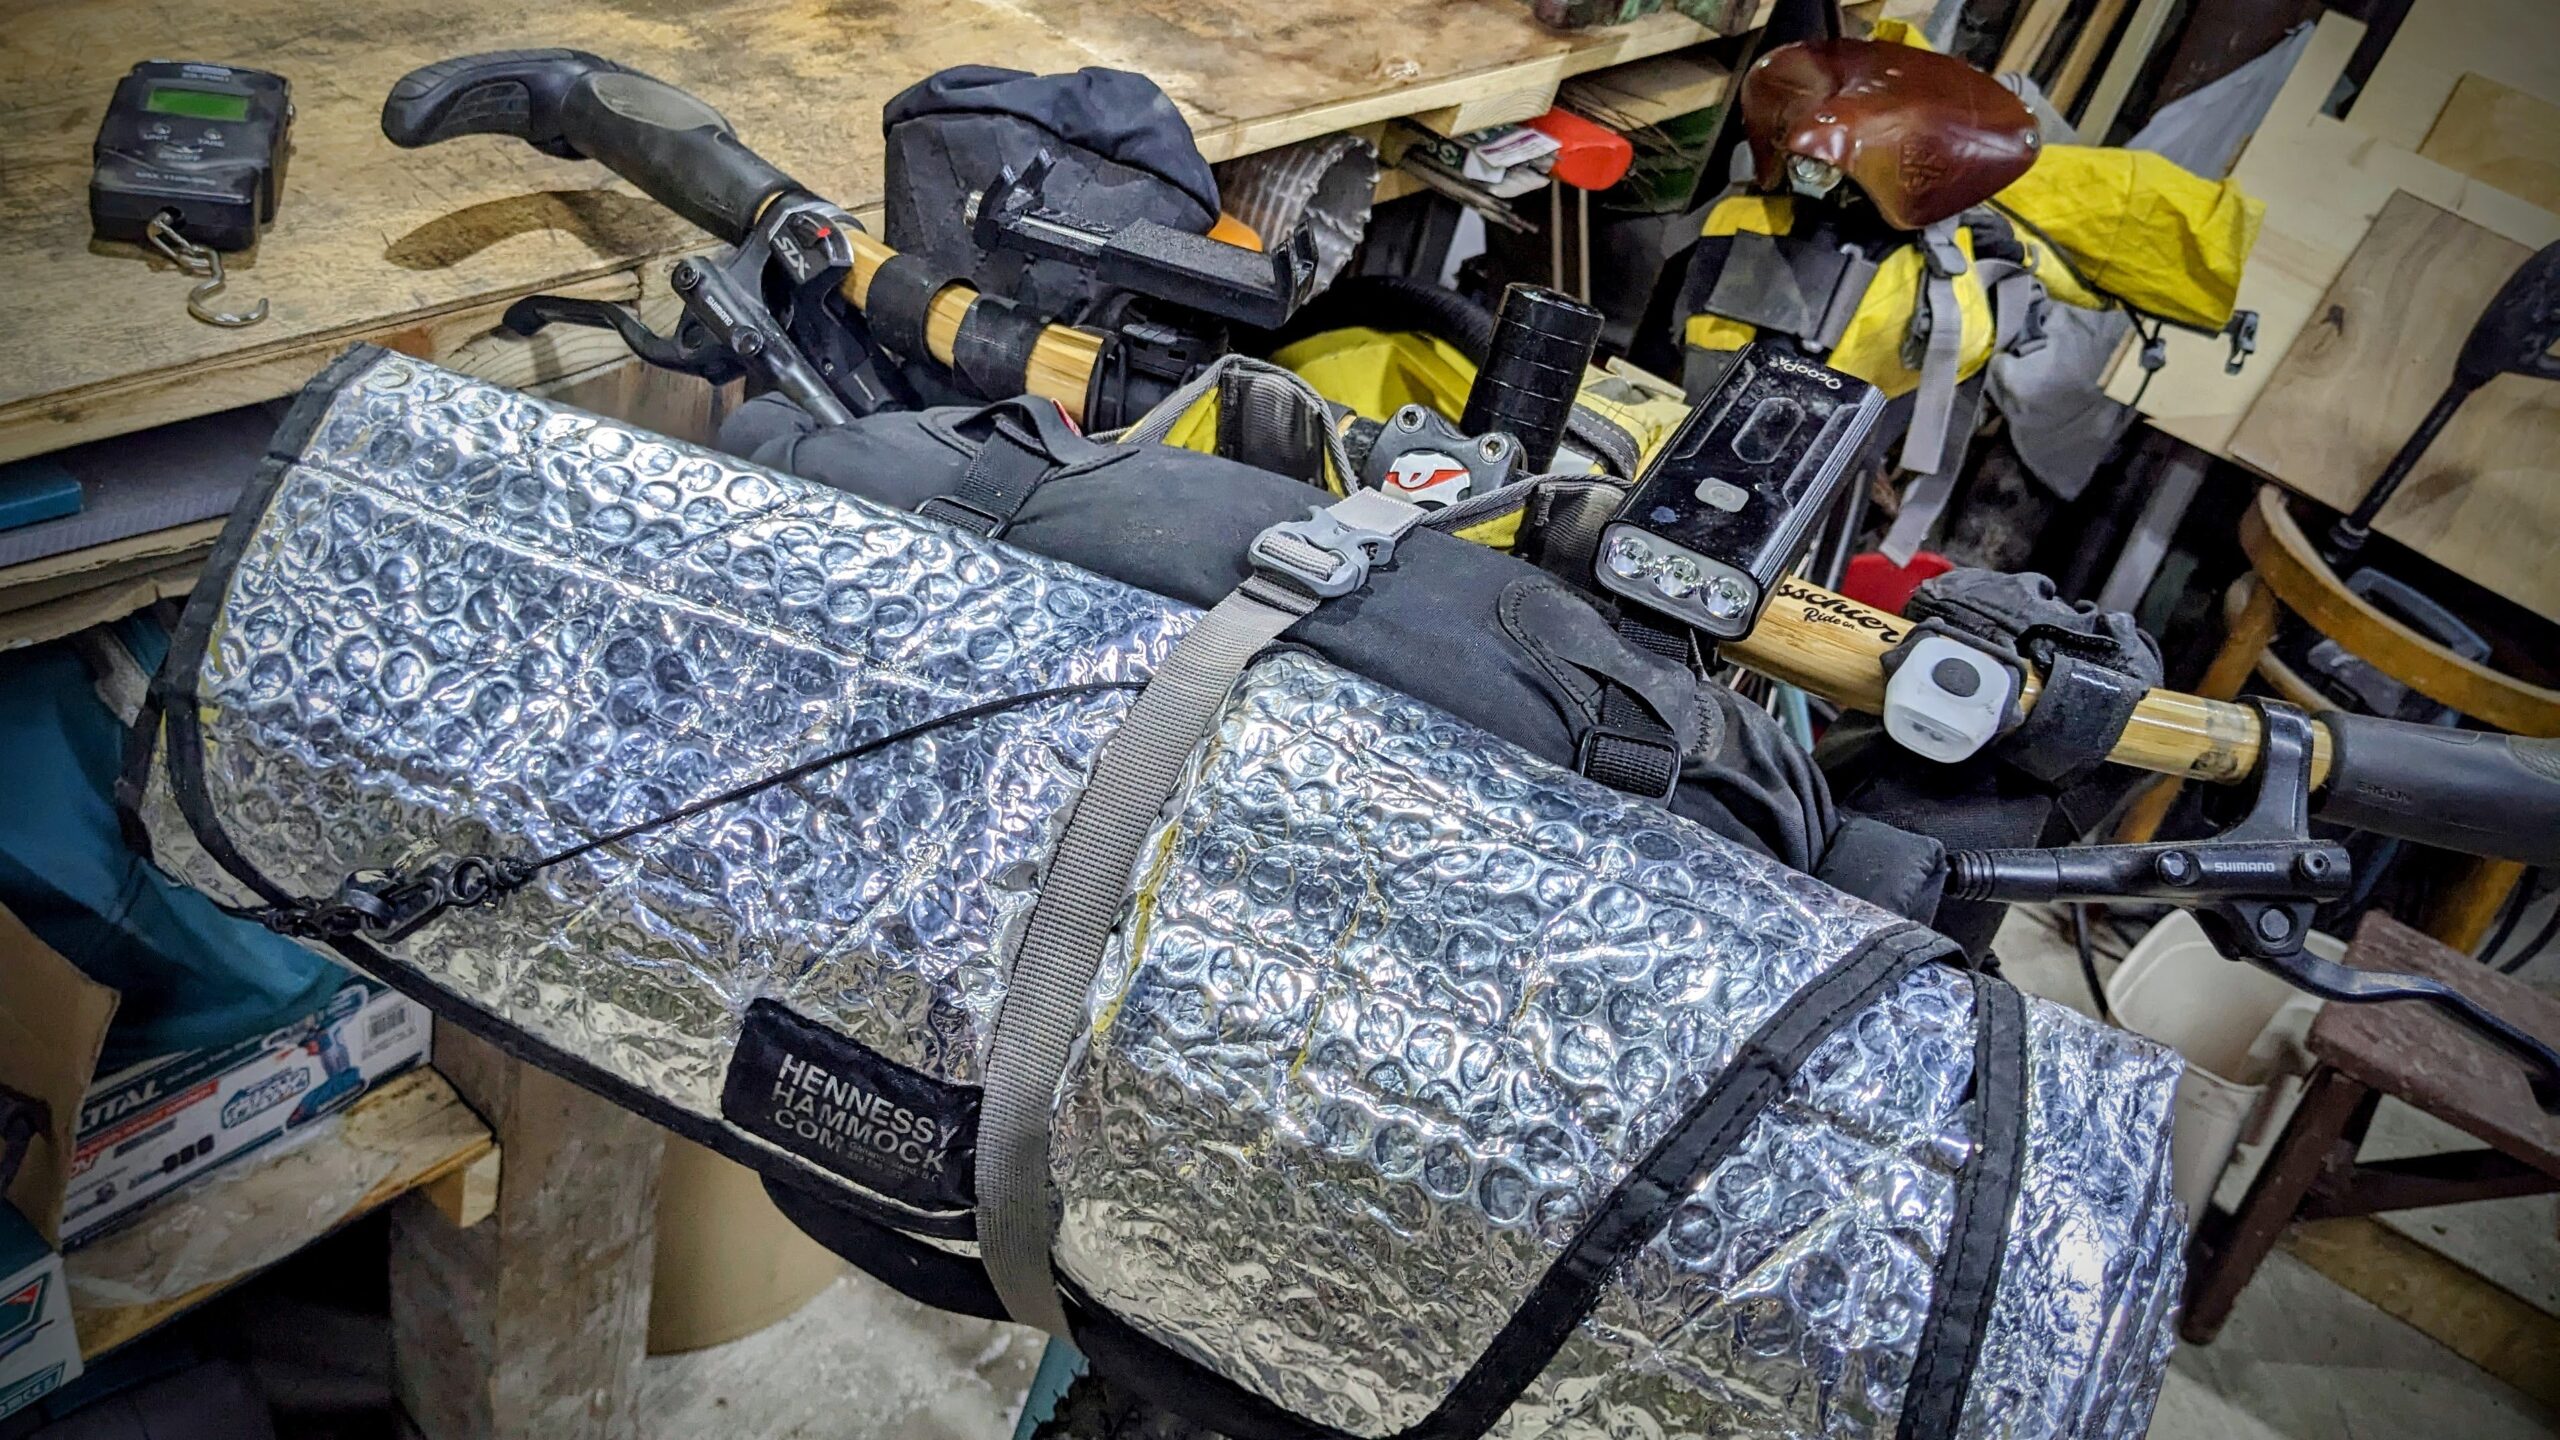 Tom’s Bike Shed: Packing Ultralight Camping Gear For A Bikepacking Race (Video)